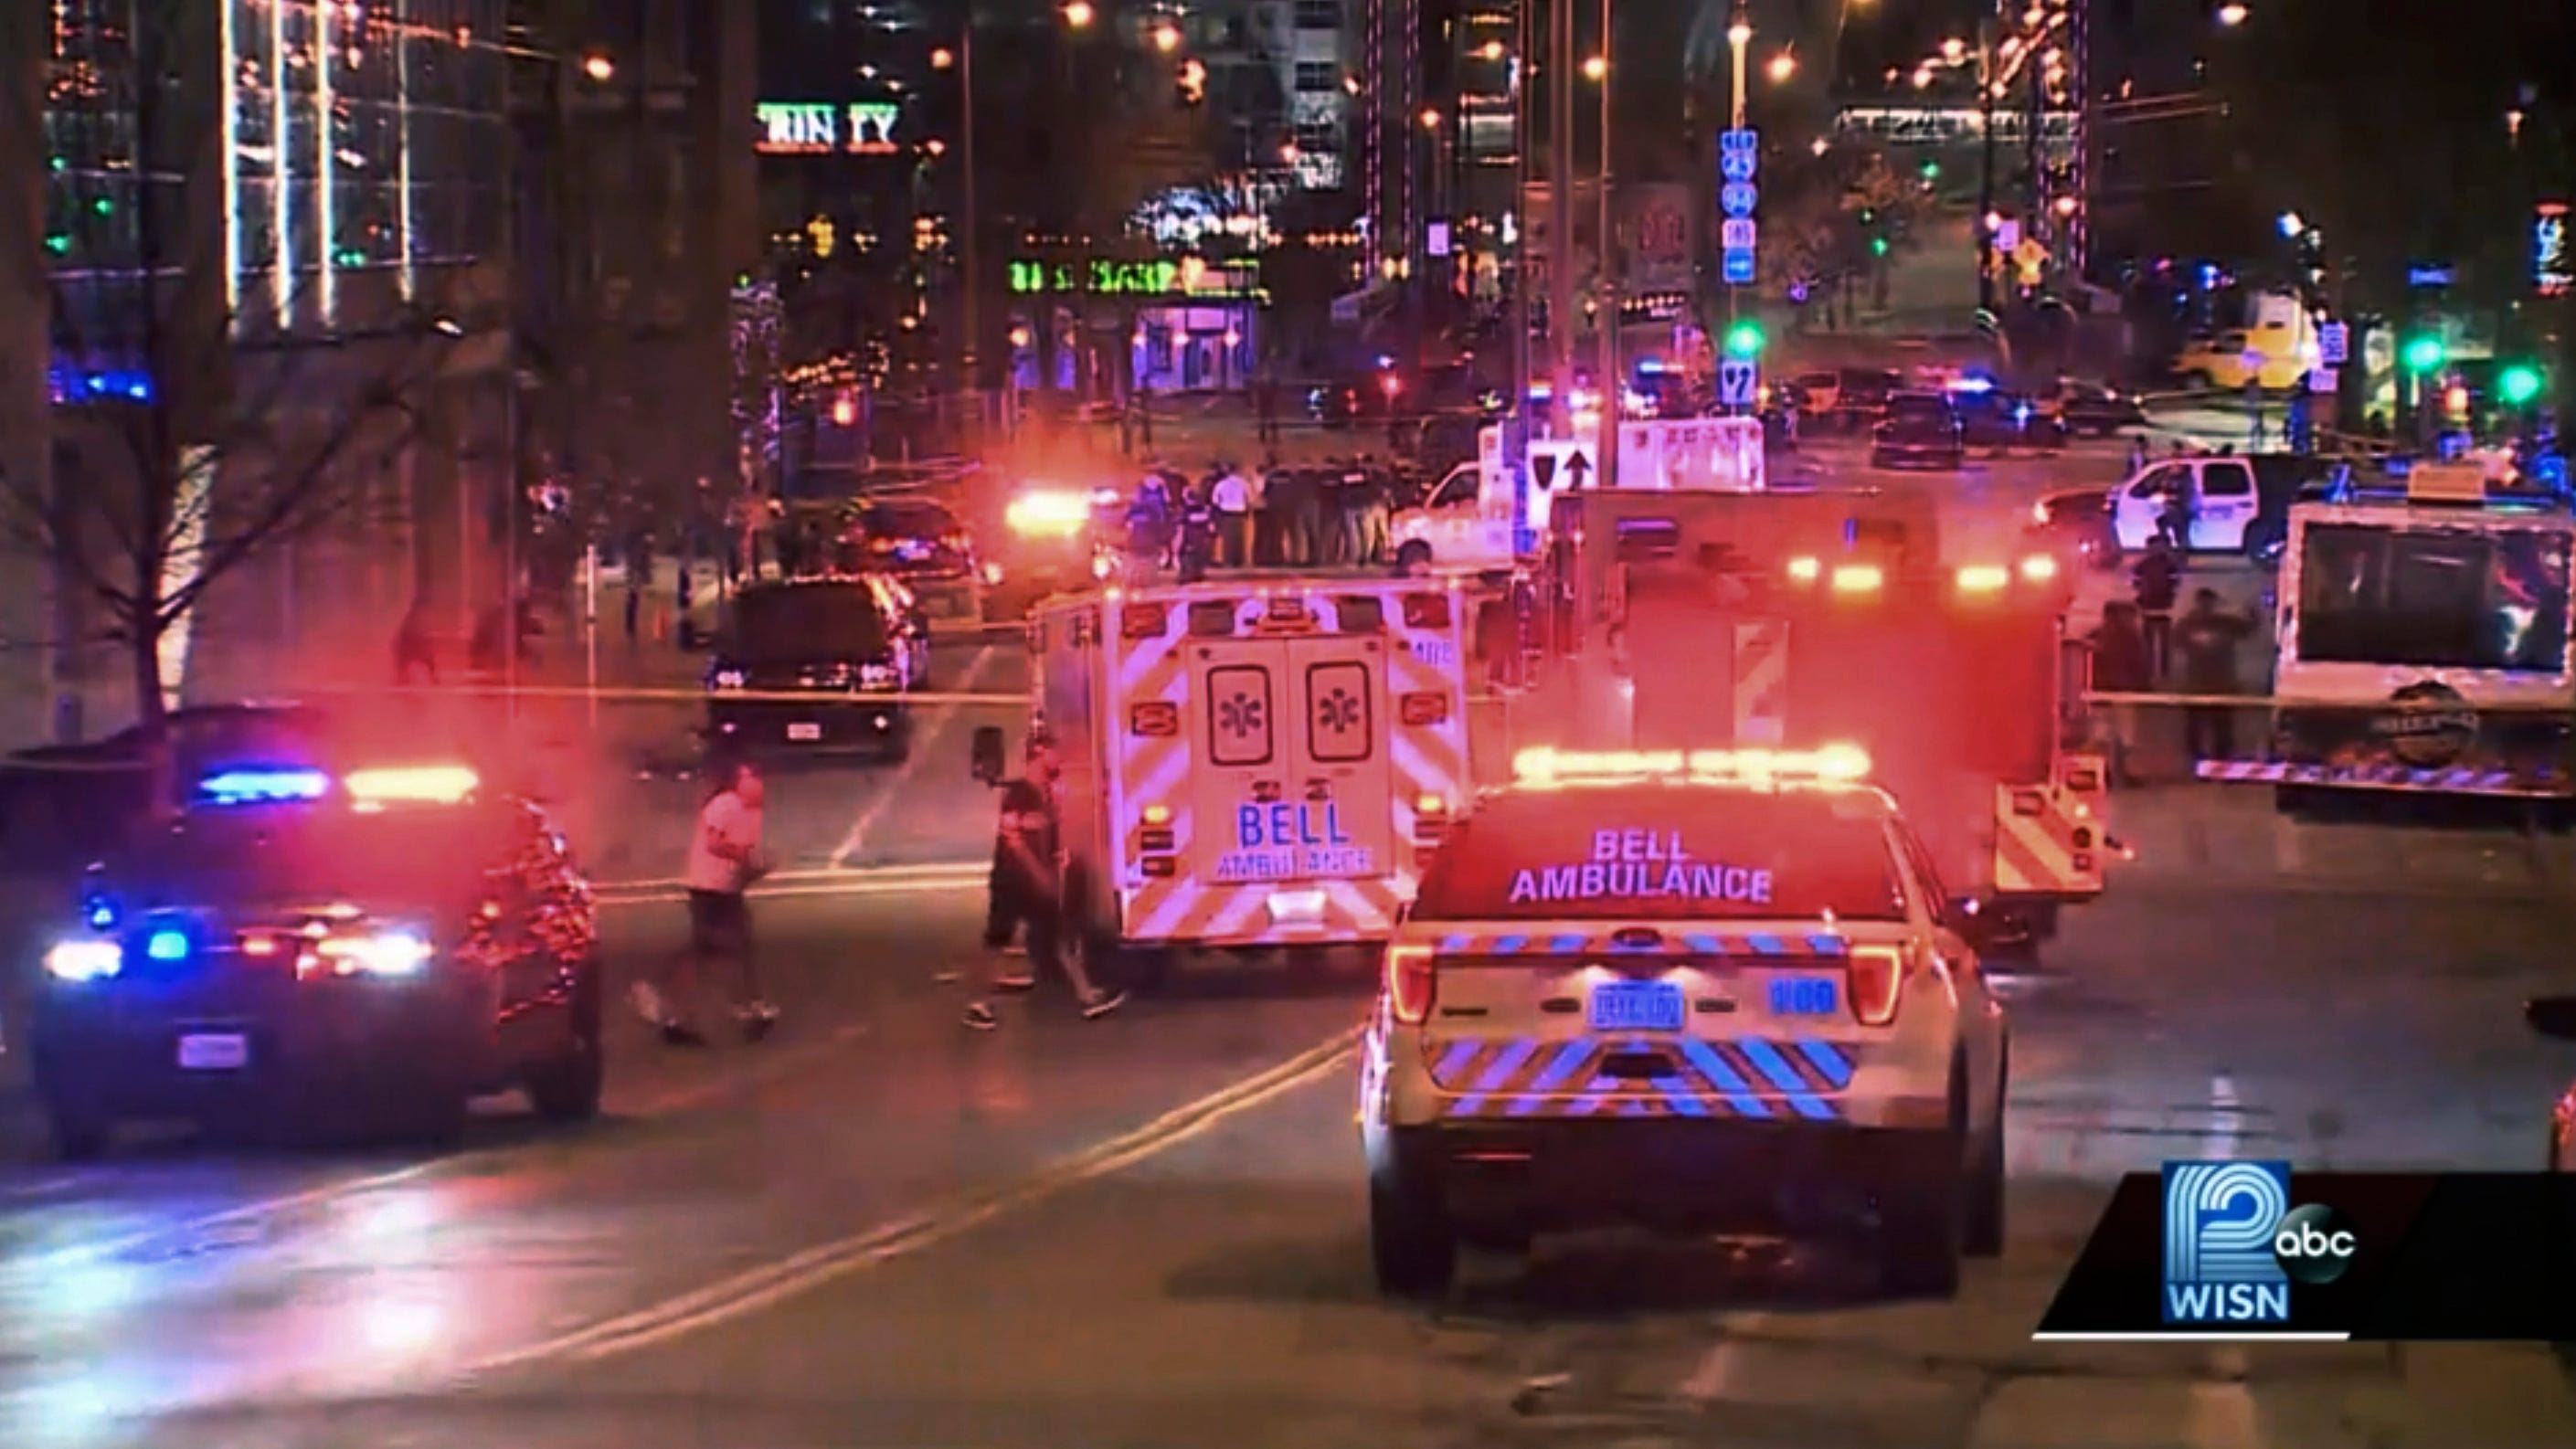 At least 20 people injured in two downtown Milwaukee shootings after Bucks playoff game